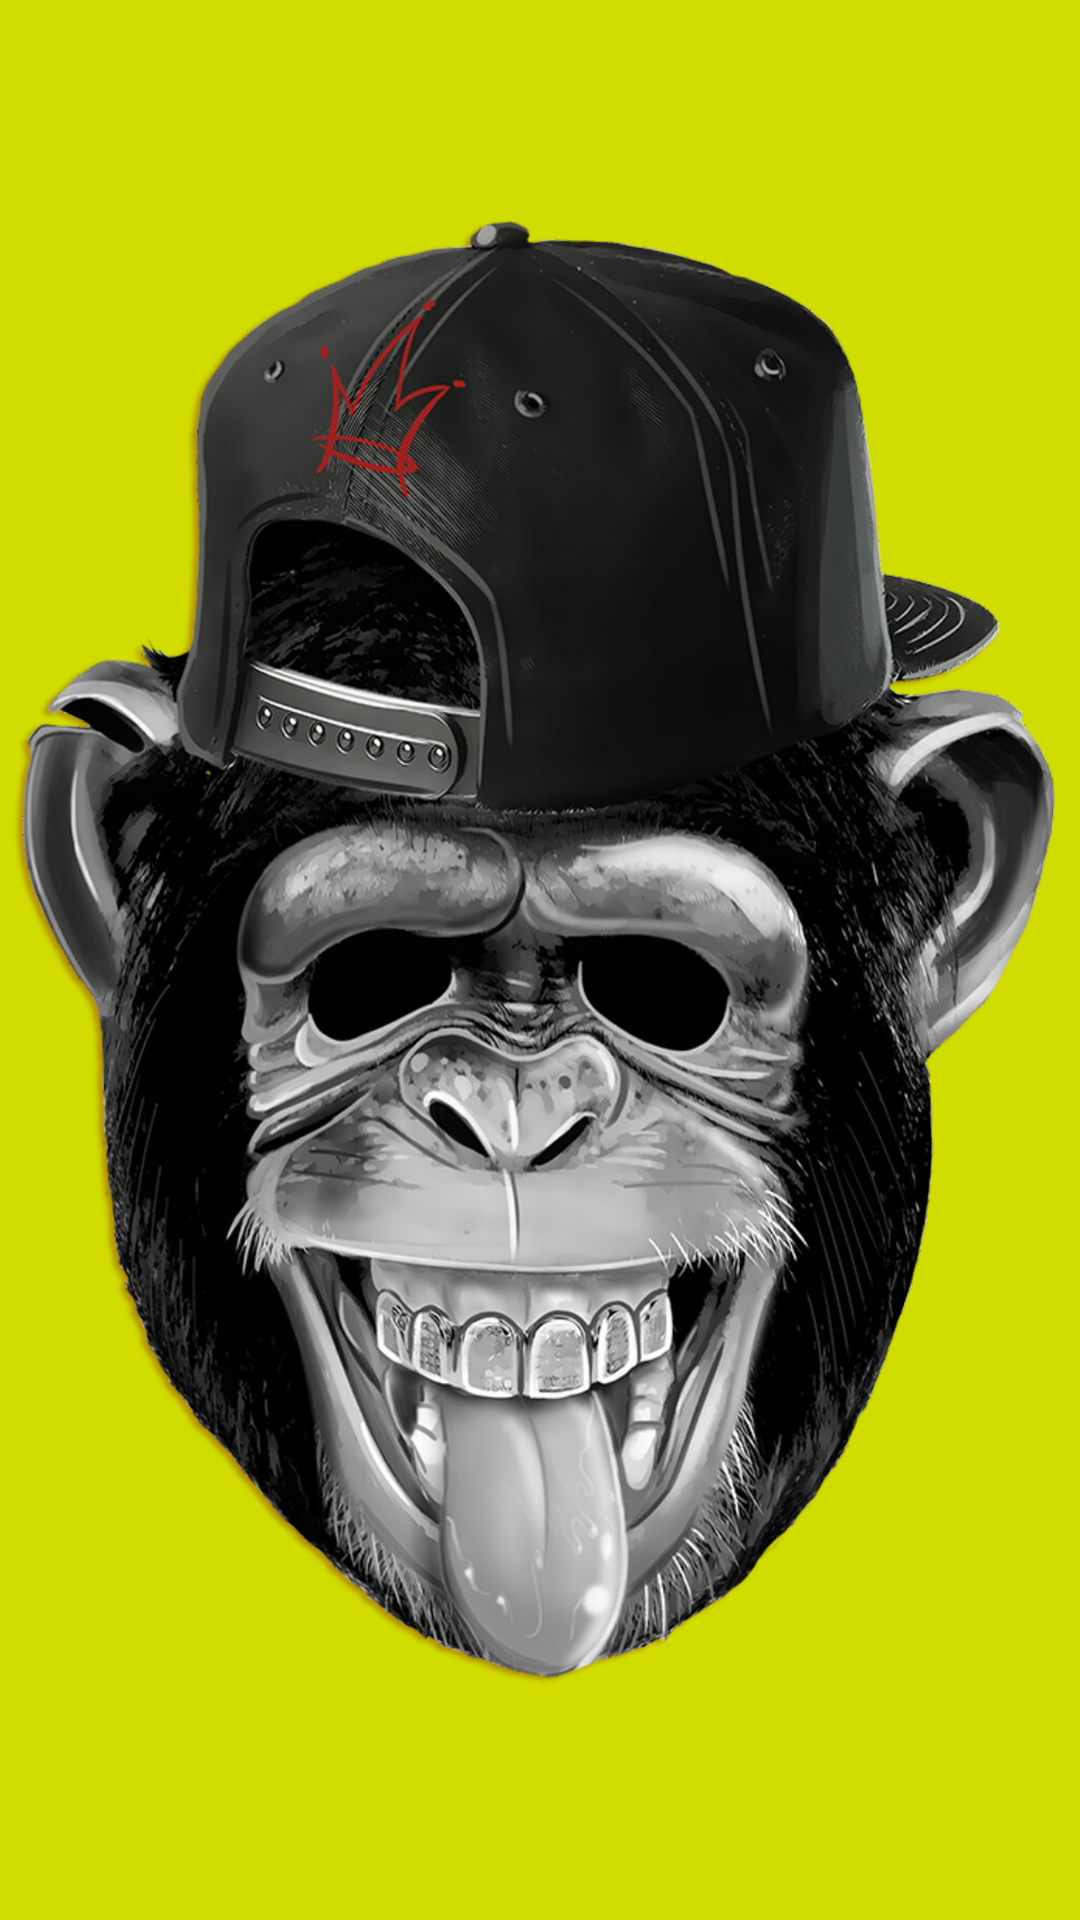 Monkey Android - HD Wallpaper 